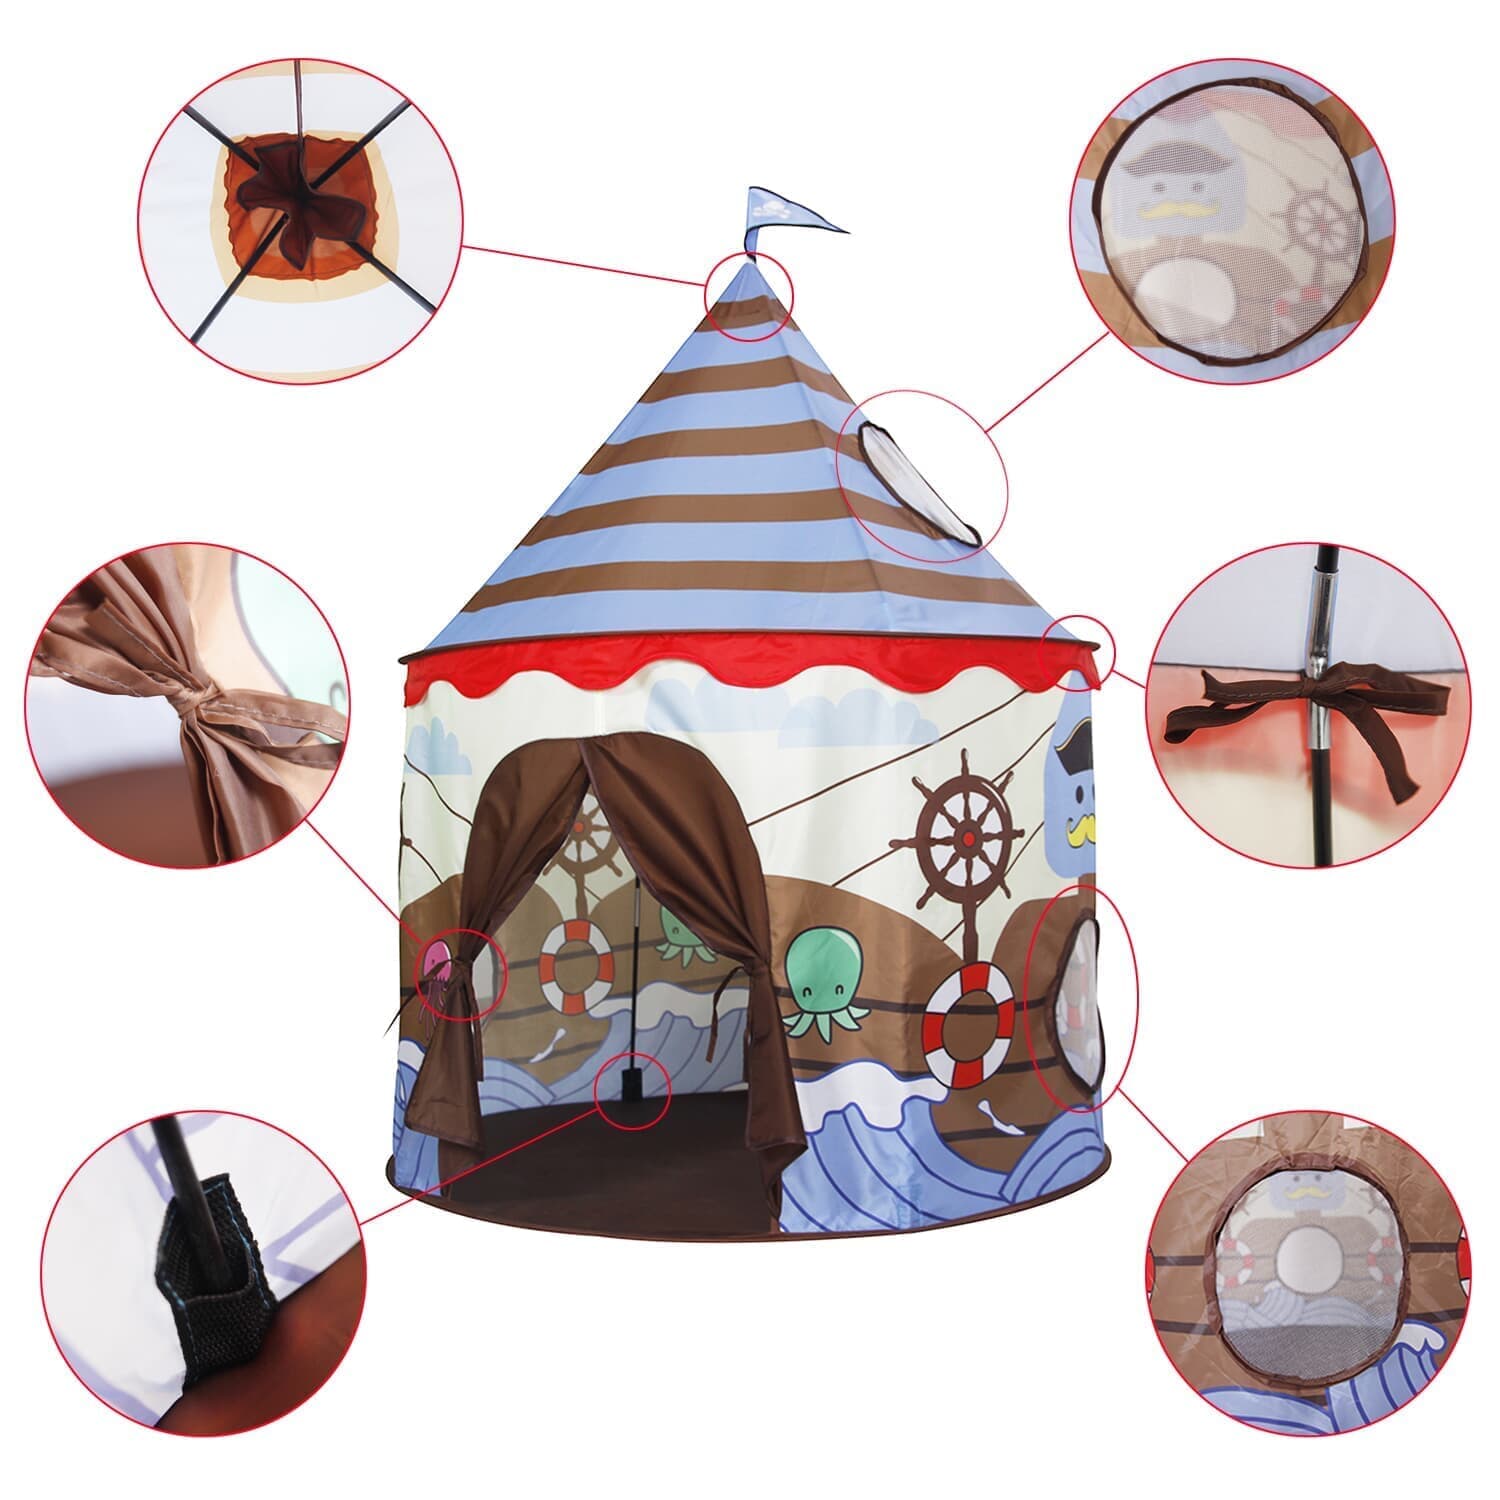 Homfu Castle Playhouse Pop Up Indoor Outdoor Toy Kids Play Tent For Children Gift With Viking Pattern Homfu Castle Playhouse Pop Up Indoor Outdoor Toy Kids Play Tent For Children Gift With Viking Pattern 45.72